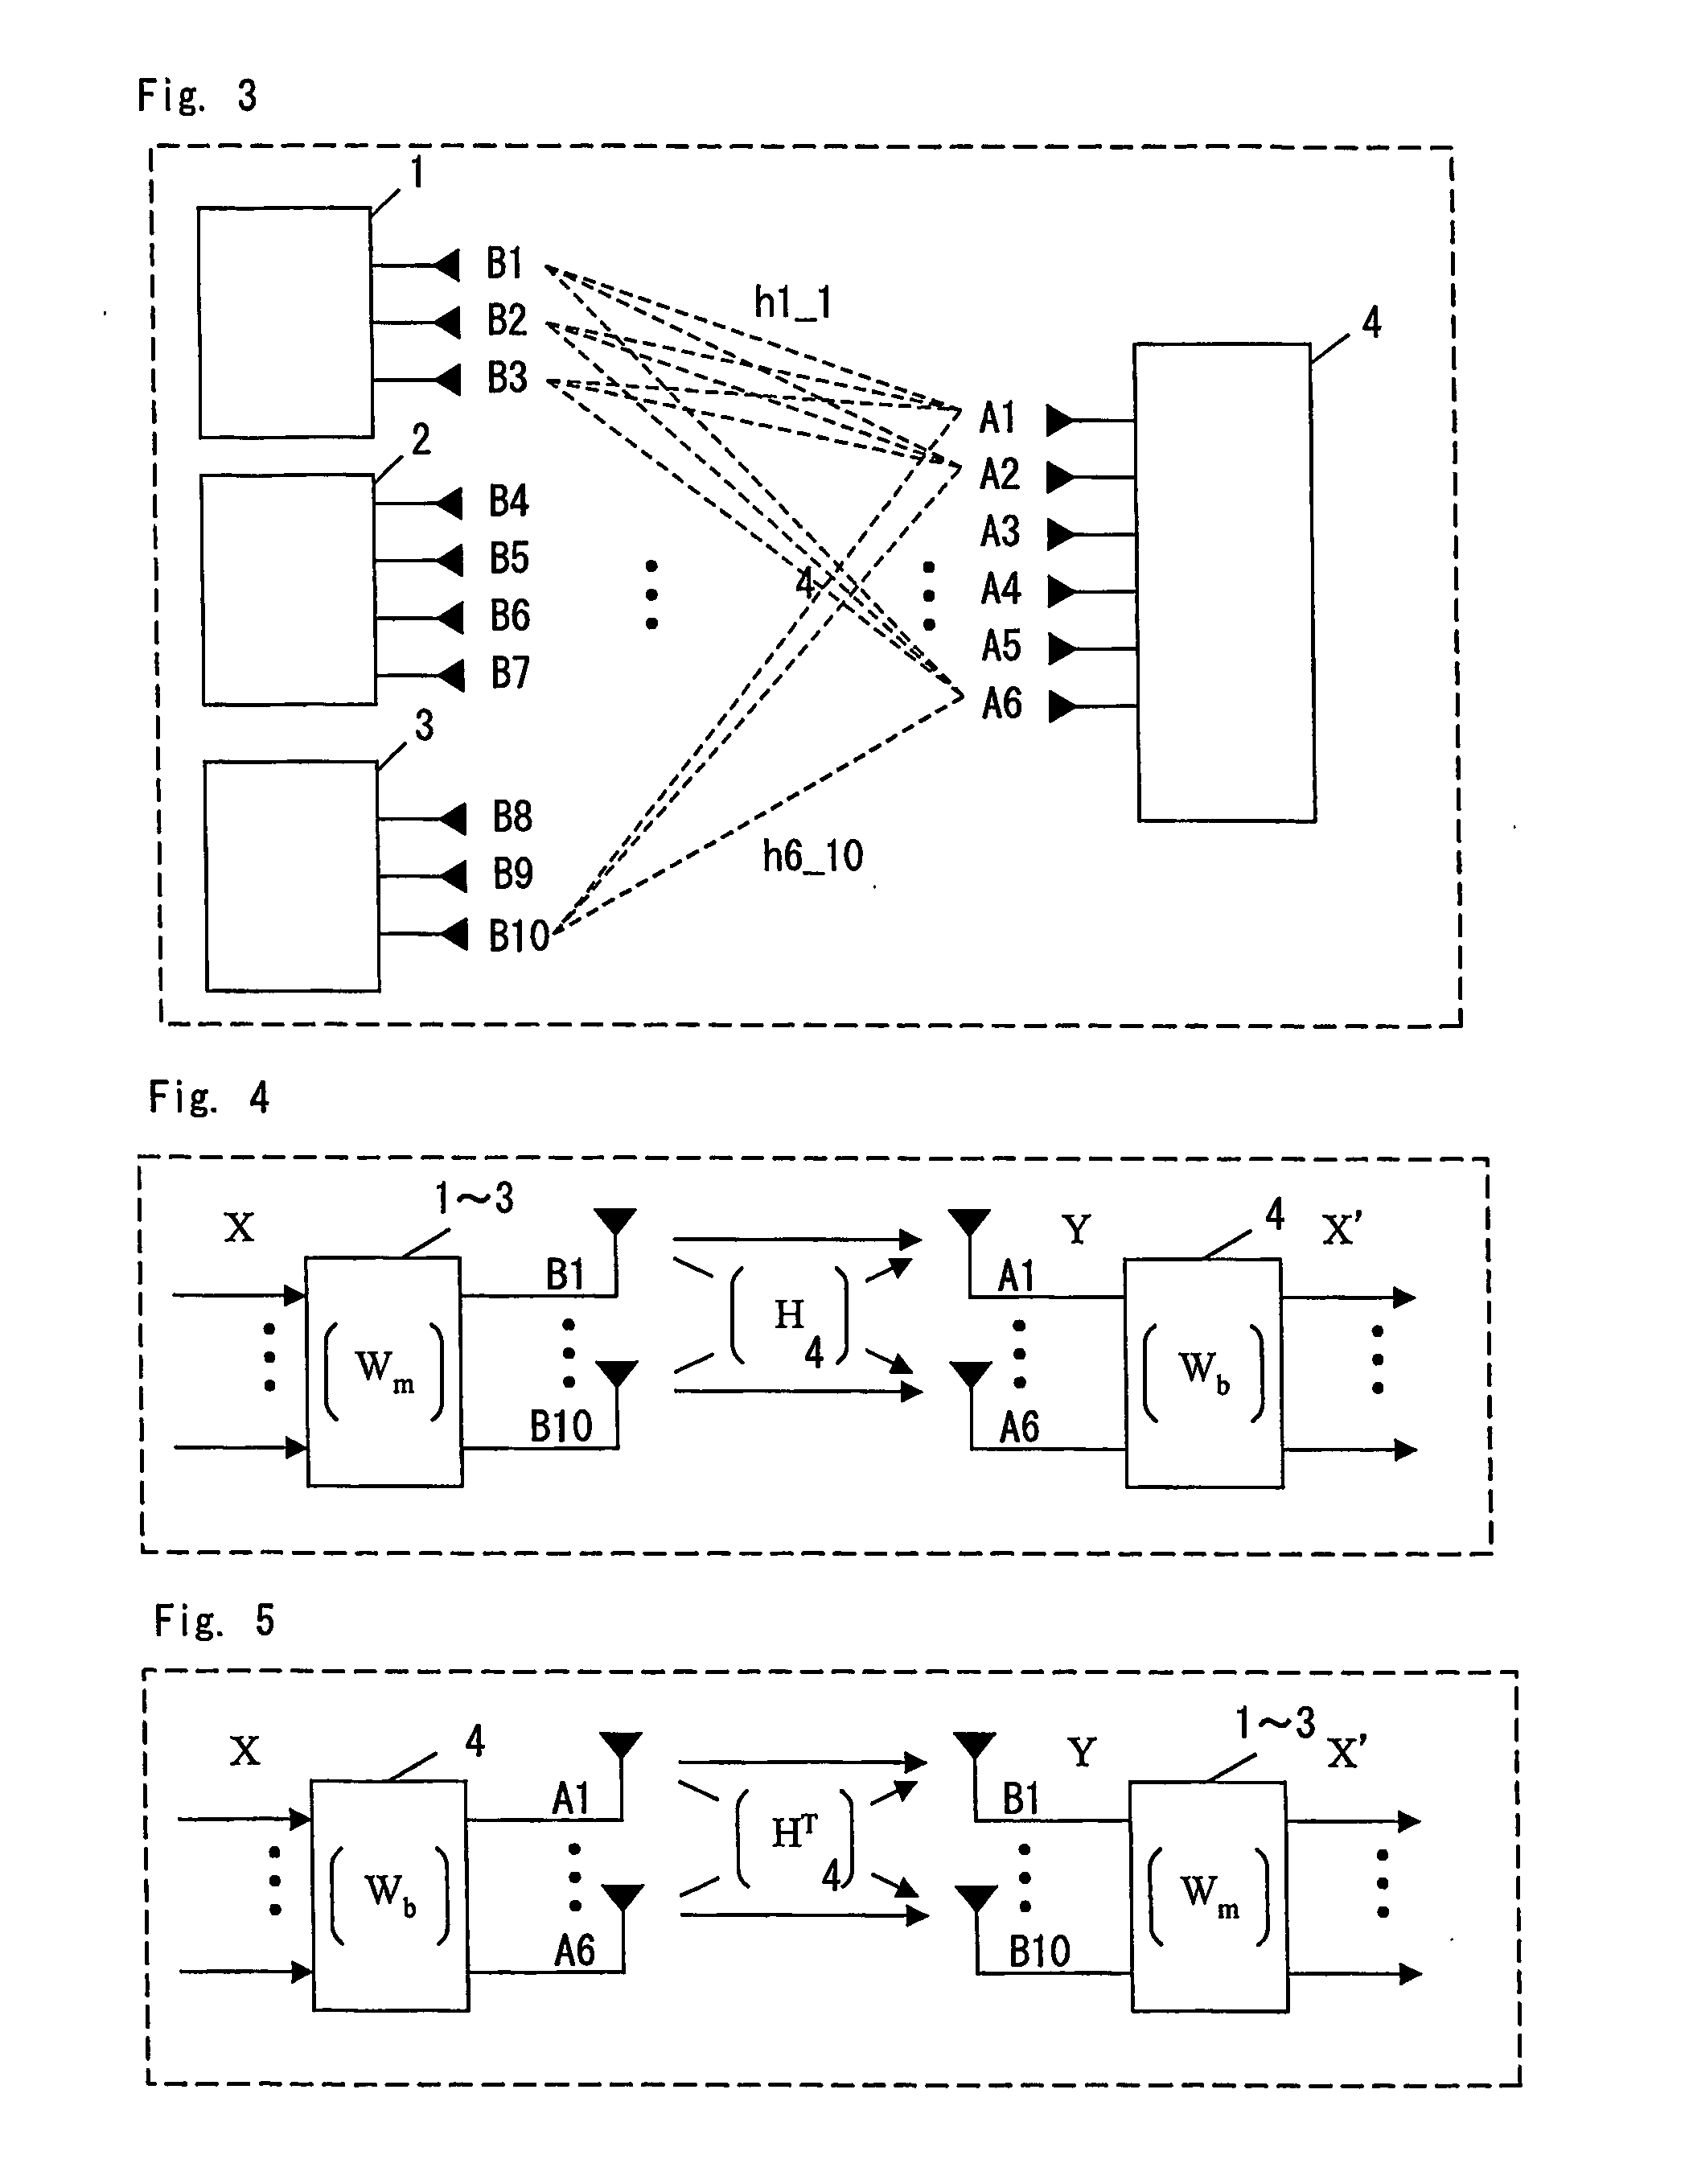 Space division multiplex wireless communication system, device and method for the same